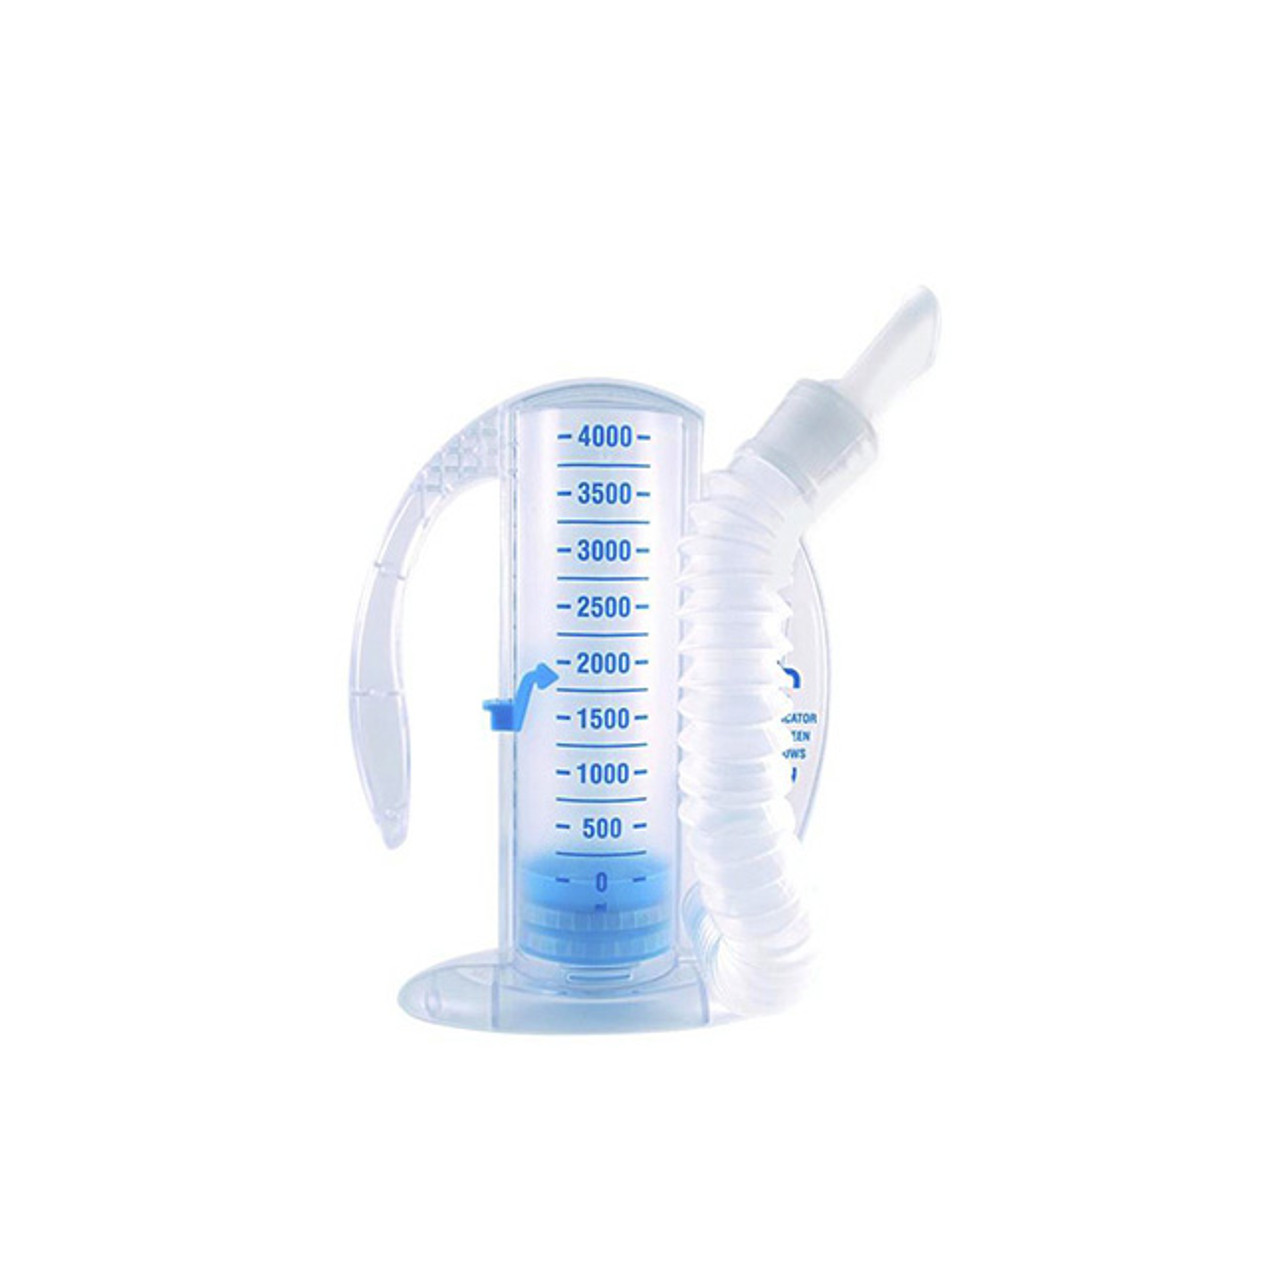 VYAIRE P001903A AIRLIFE VOLUMETRIC INCENTIVE SPIROMETER W/ ONE-WAY VALVE 2500ml FLEXIBLE TUBING W/ MOUTHPIECE HOLDER